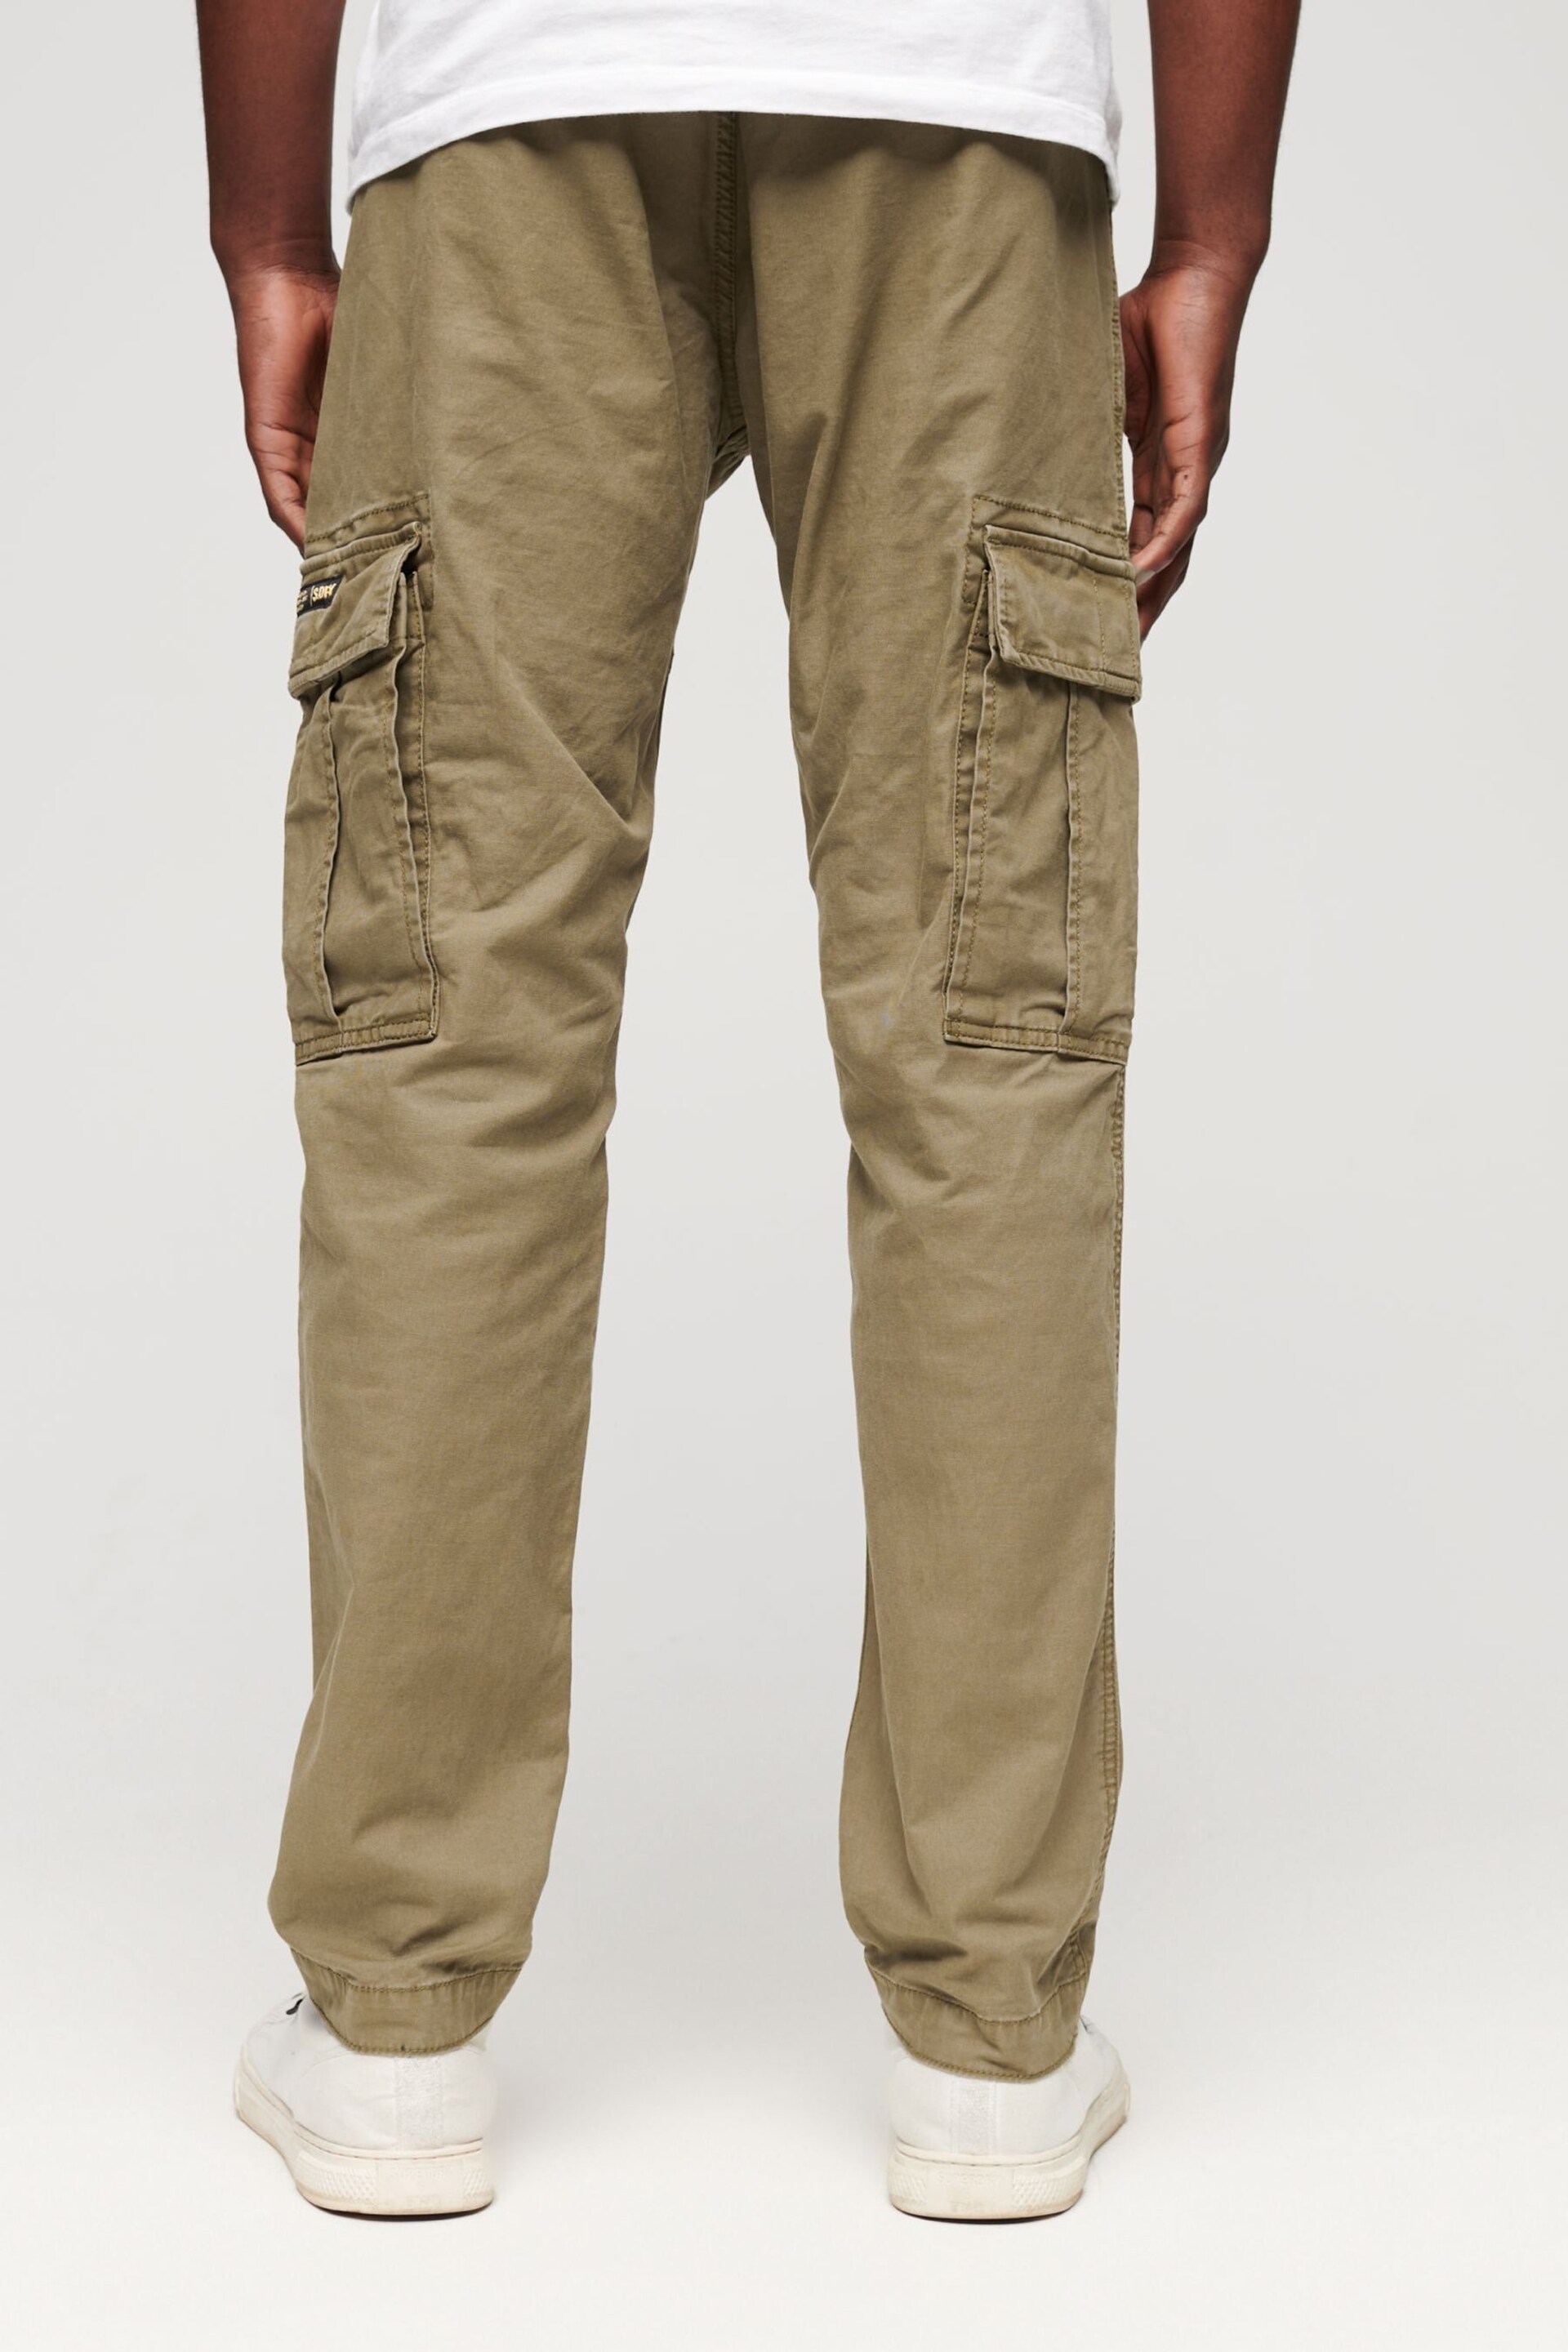 Superdry Khaki Green Core Cargo Utility Cargo Trousers - Image 2 of 6